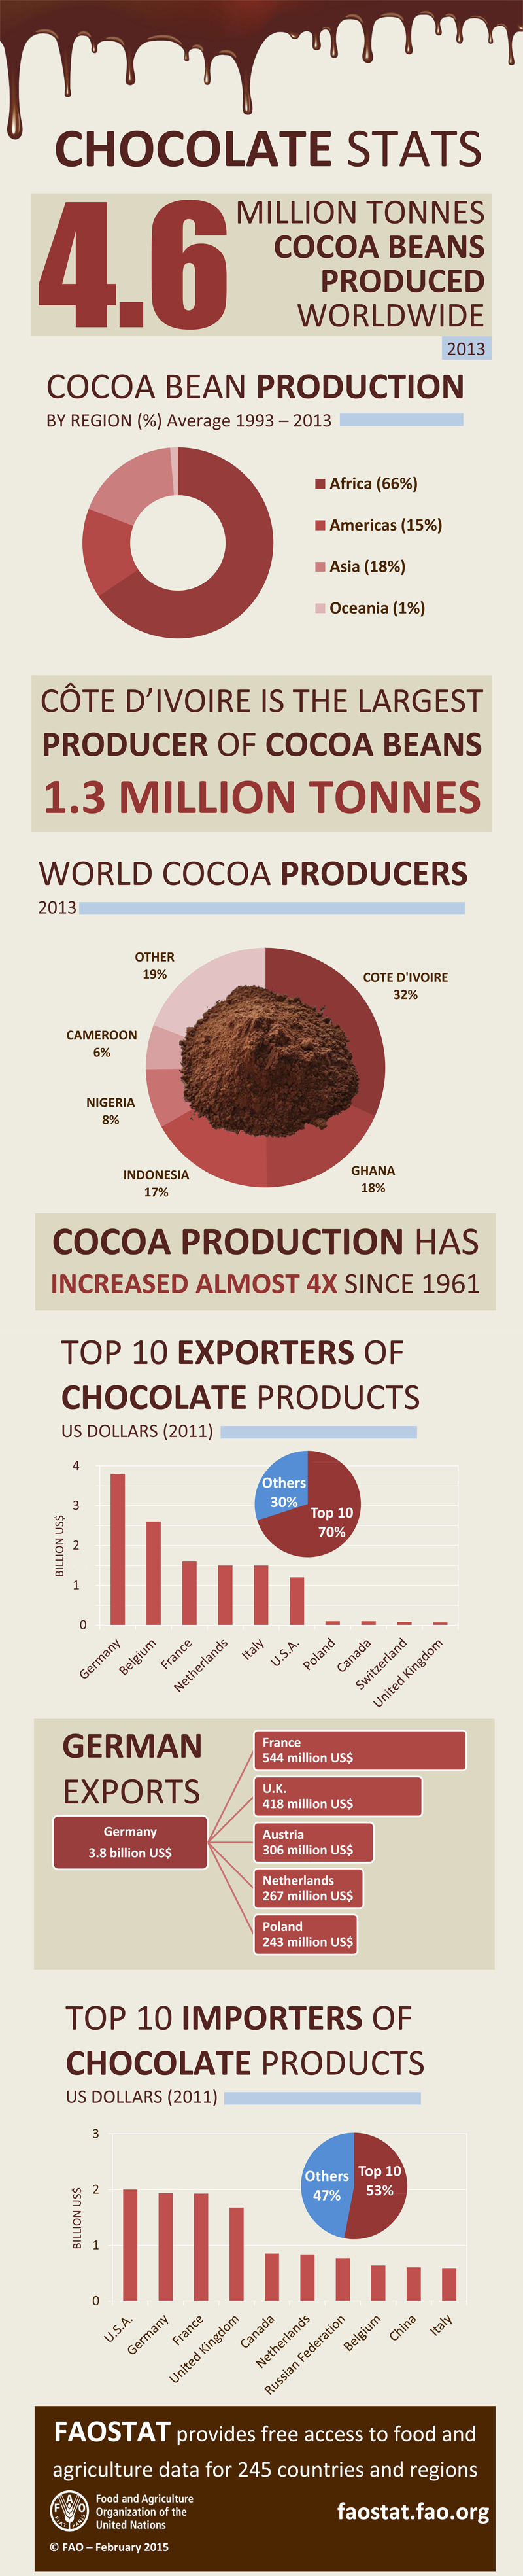 Chocolate Facts and Figures